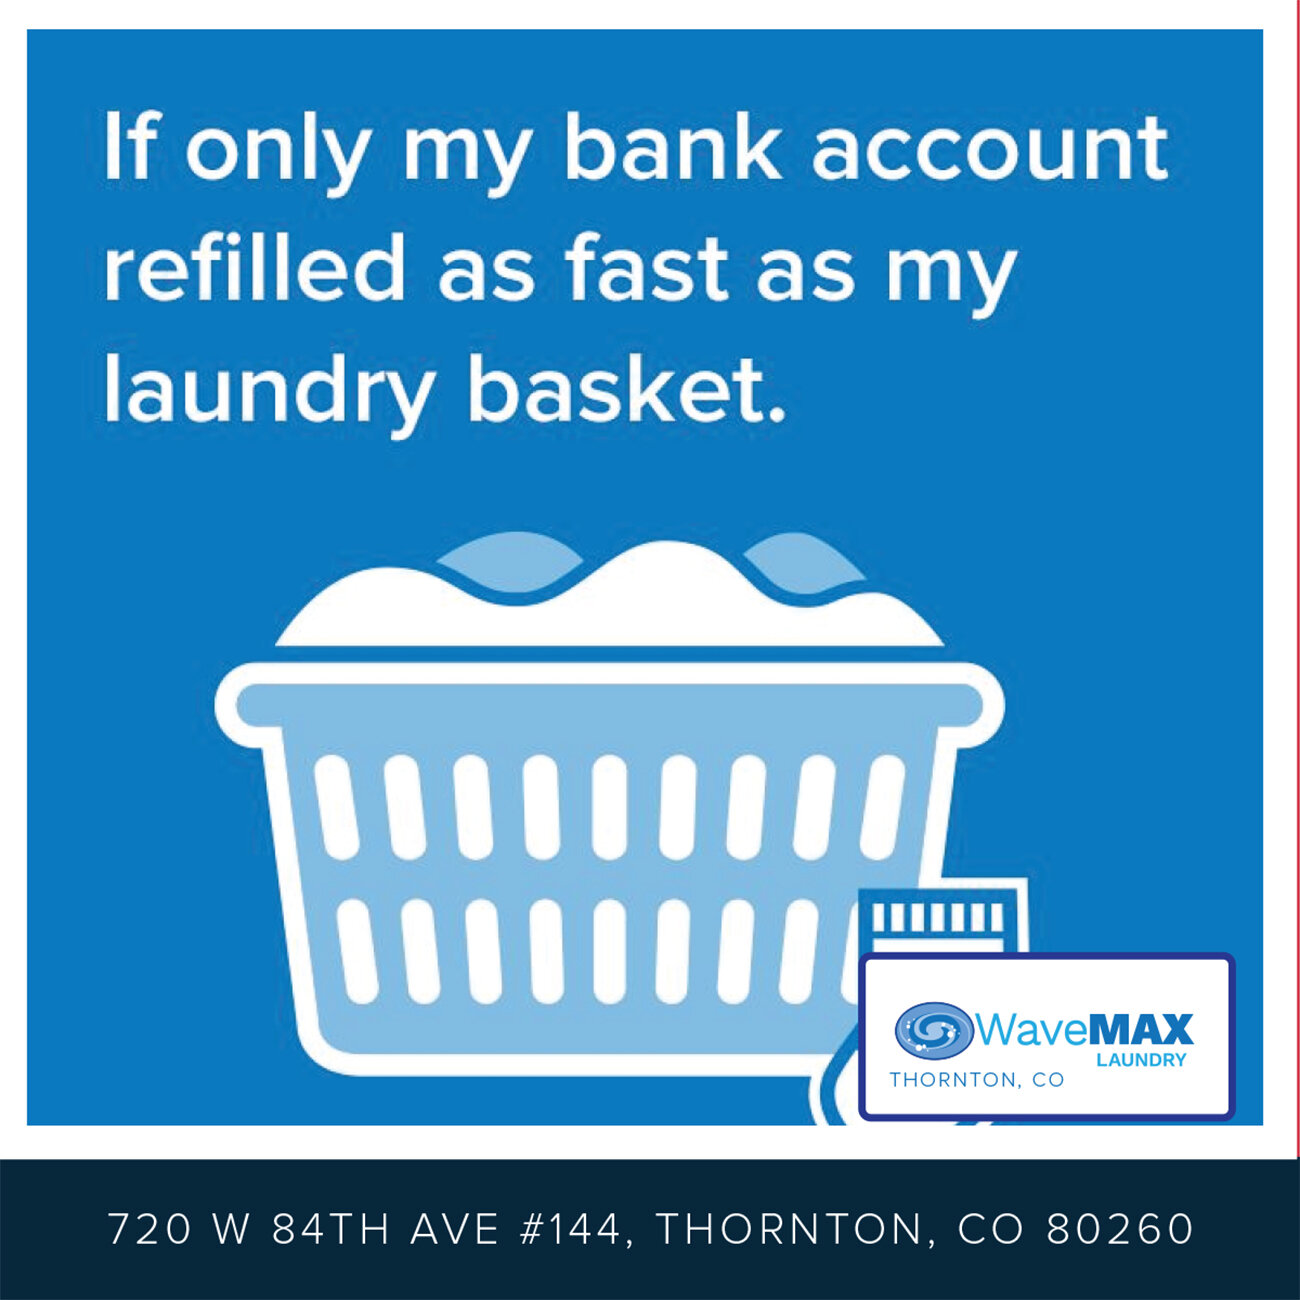 All the success in the world is our wish for you. We hope your bank accounts fill as fast as the laundry baskets. If you are feeling like the laundry is never ending, we can help. We will wash, dry and fold your clothes for $1.69/lb. ($15 minimum). F